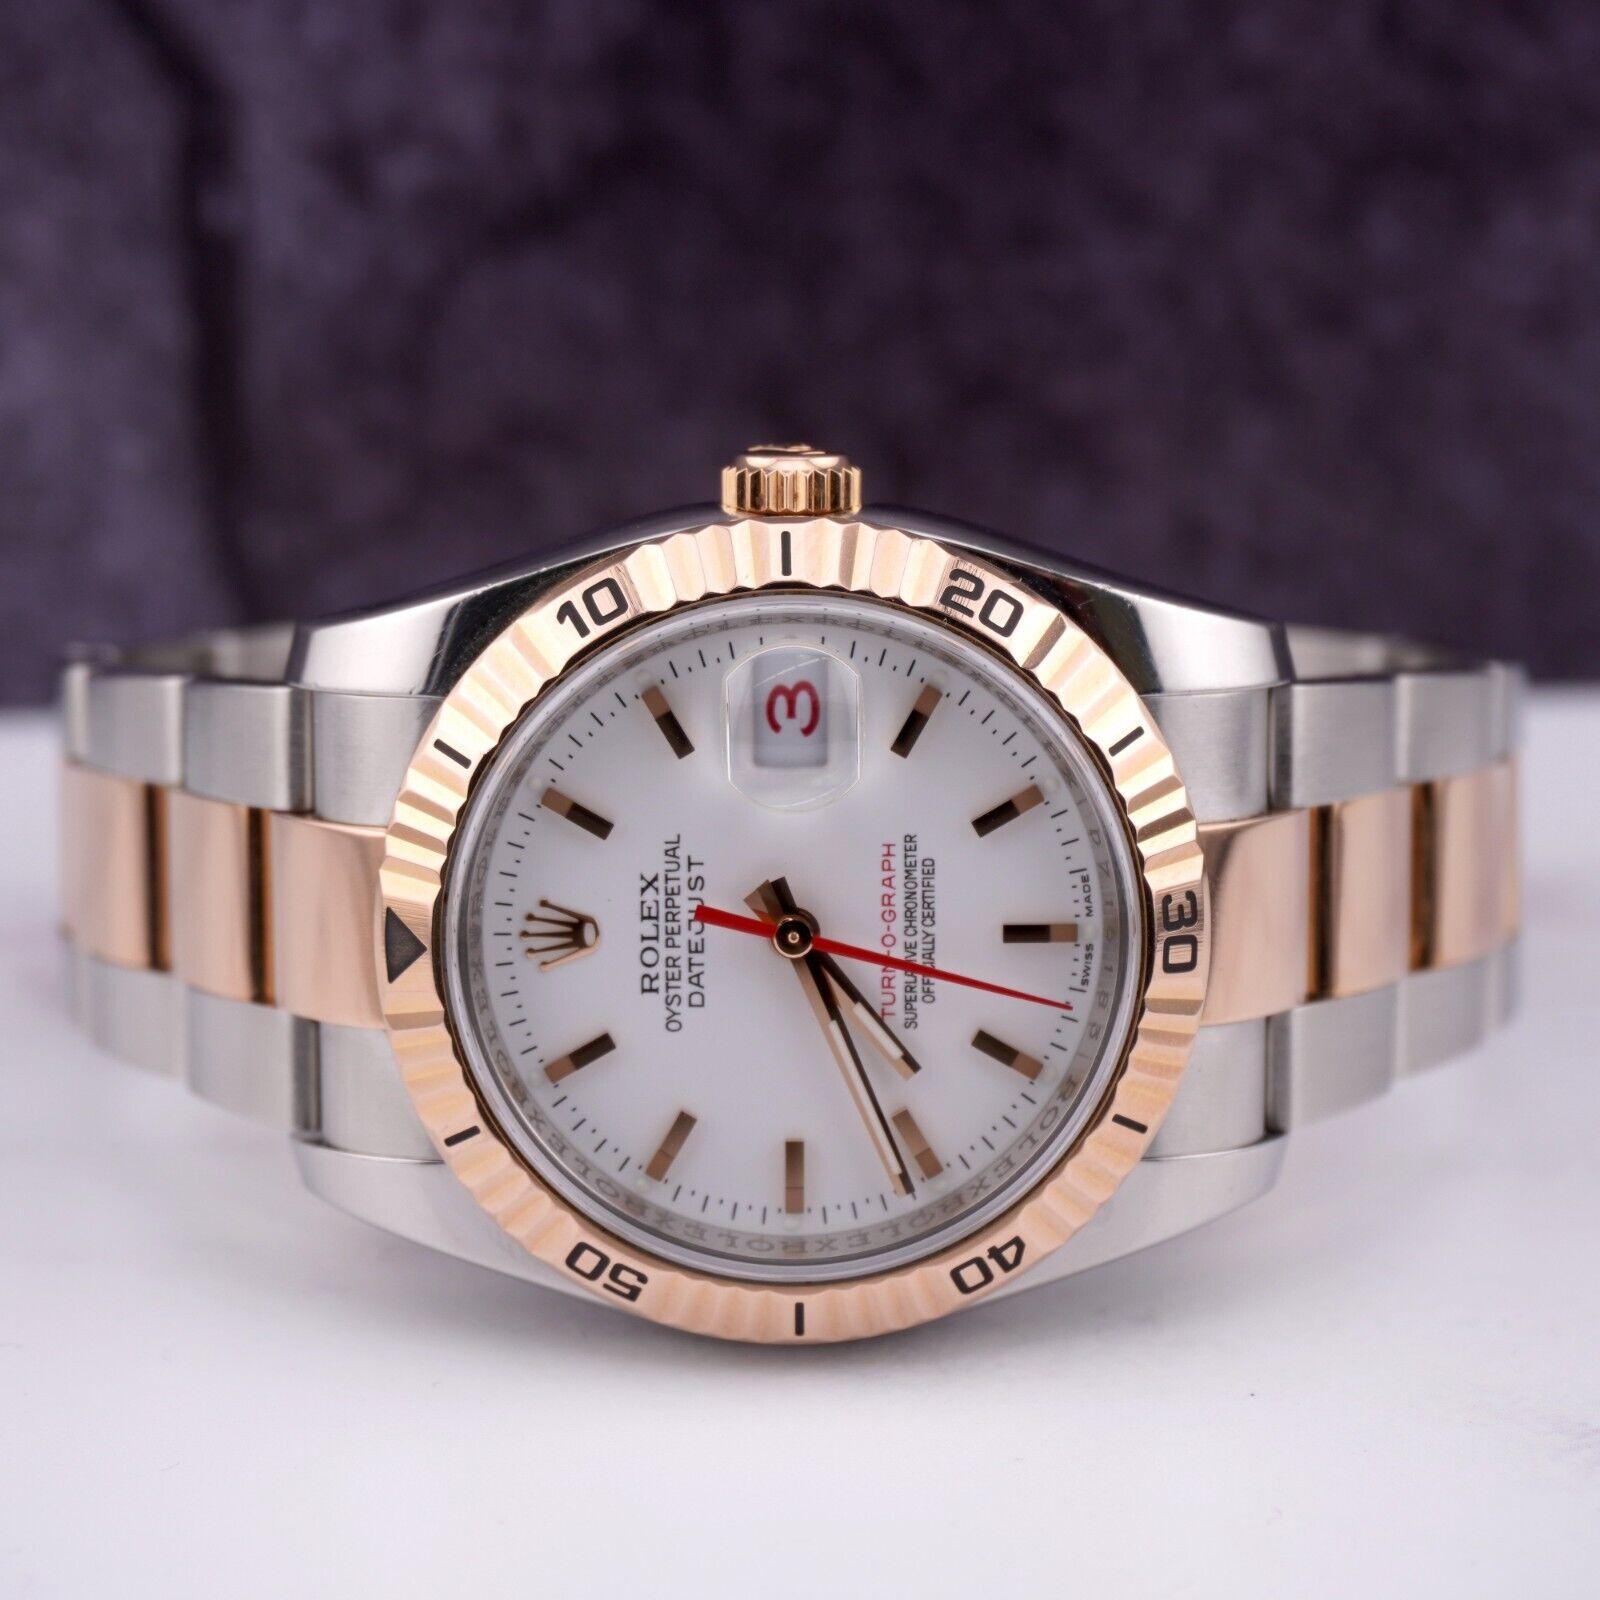 Rolex Datejust Turn-O-Graph 36mm Watch. A Pre-owned watch w/ Original Box and 2009 Card. Watch is 100% Authentic and Comes with Authenticity Card. Watch Reference is 116261 and is in Excellent Condition (See Pictures). The dial color is White and